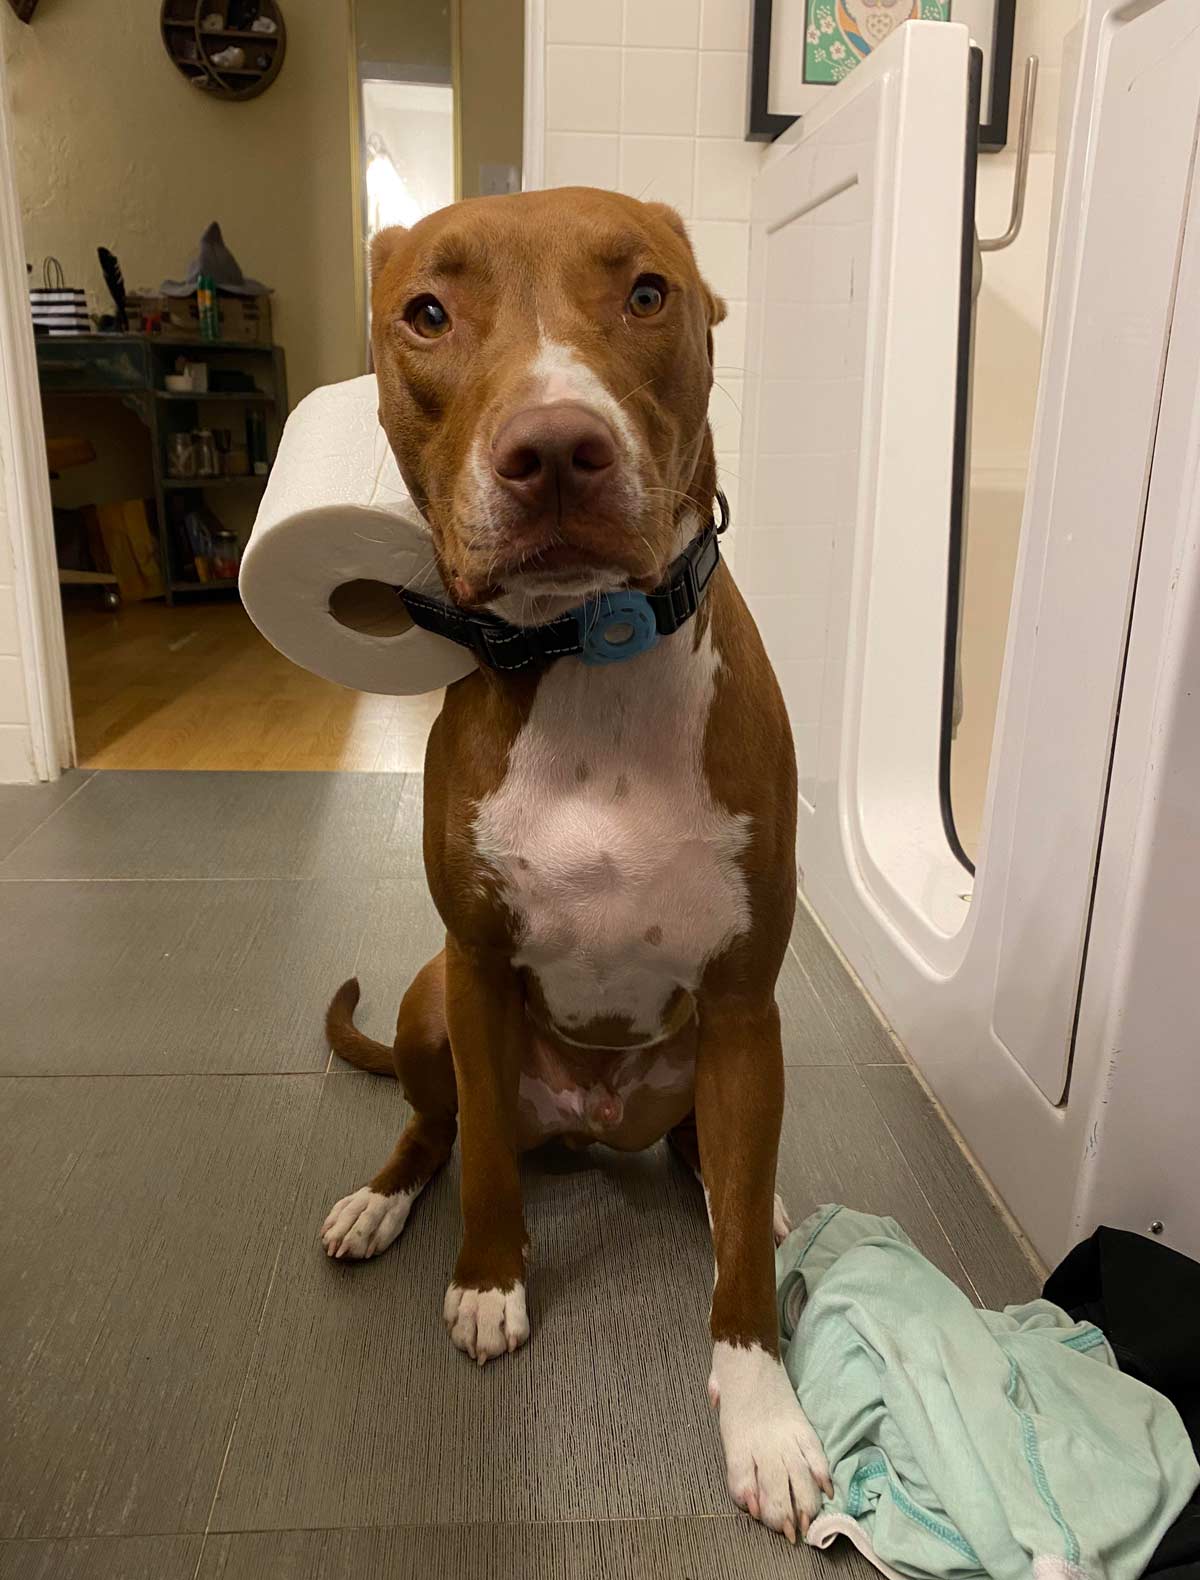 Smartest wife ever! We were both pooping on opposite sides of the house... I called her and asked for toilet paper... She yelled for the dog and then told me to call him